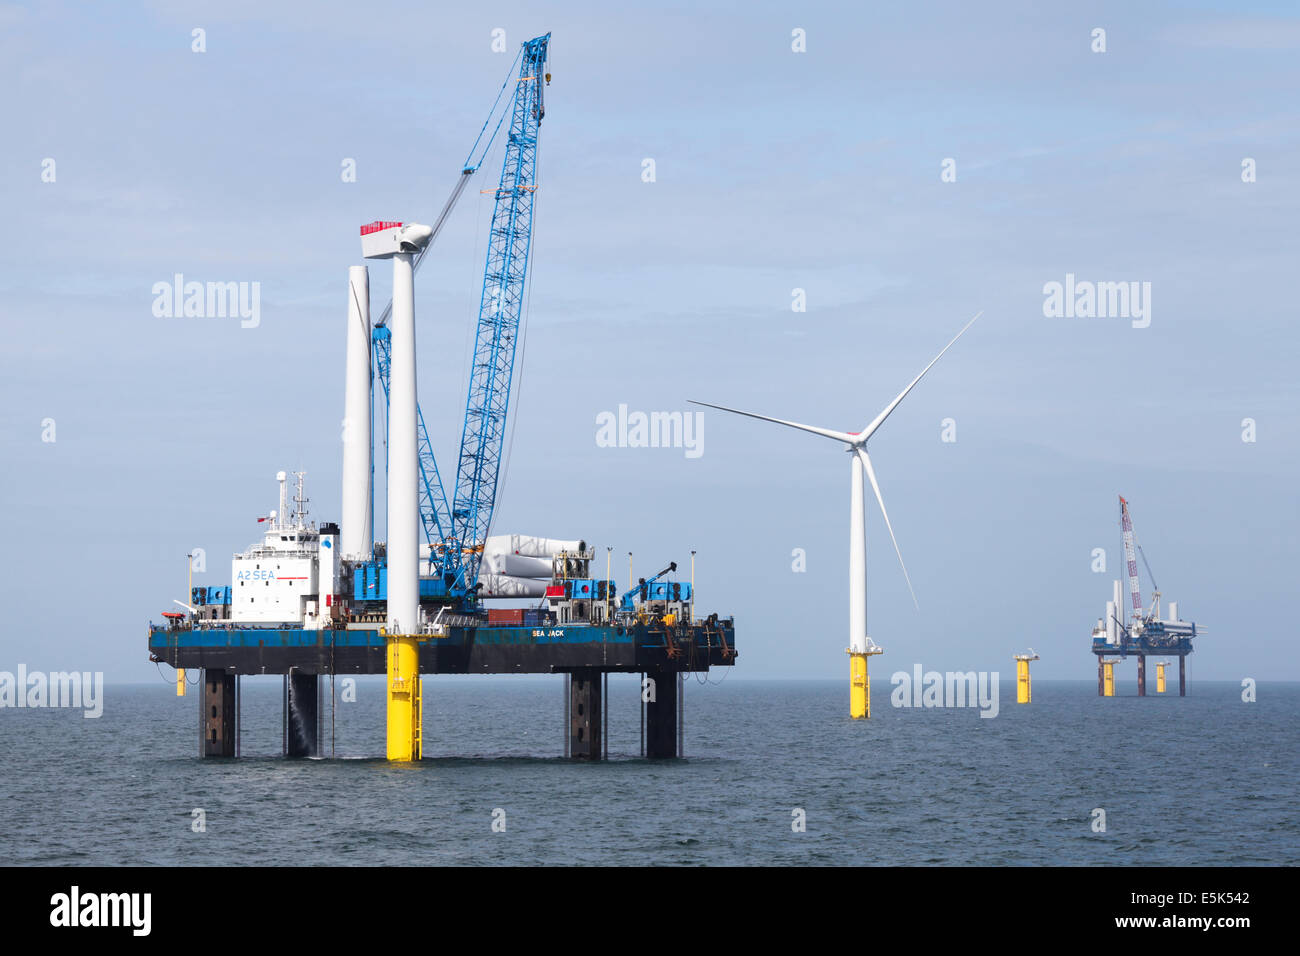 Sea Jack on the Gwynt y Mor Offshore Wind Farm off the coast of North Wales during the construction phase of spring 2014 Stock Photo